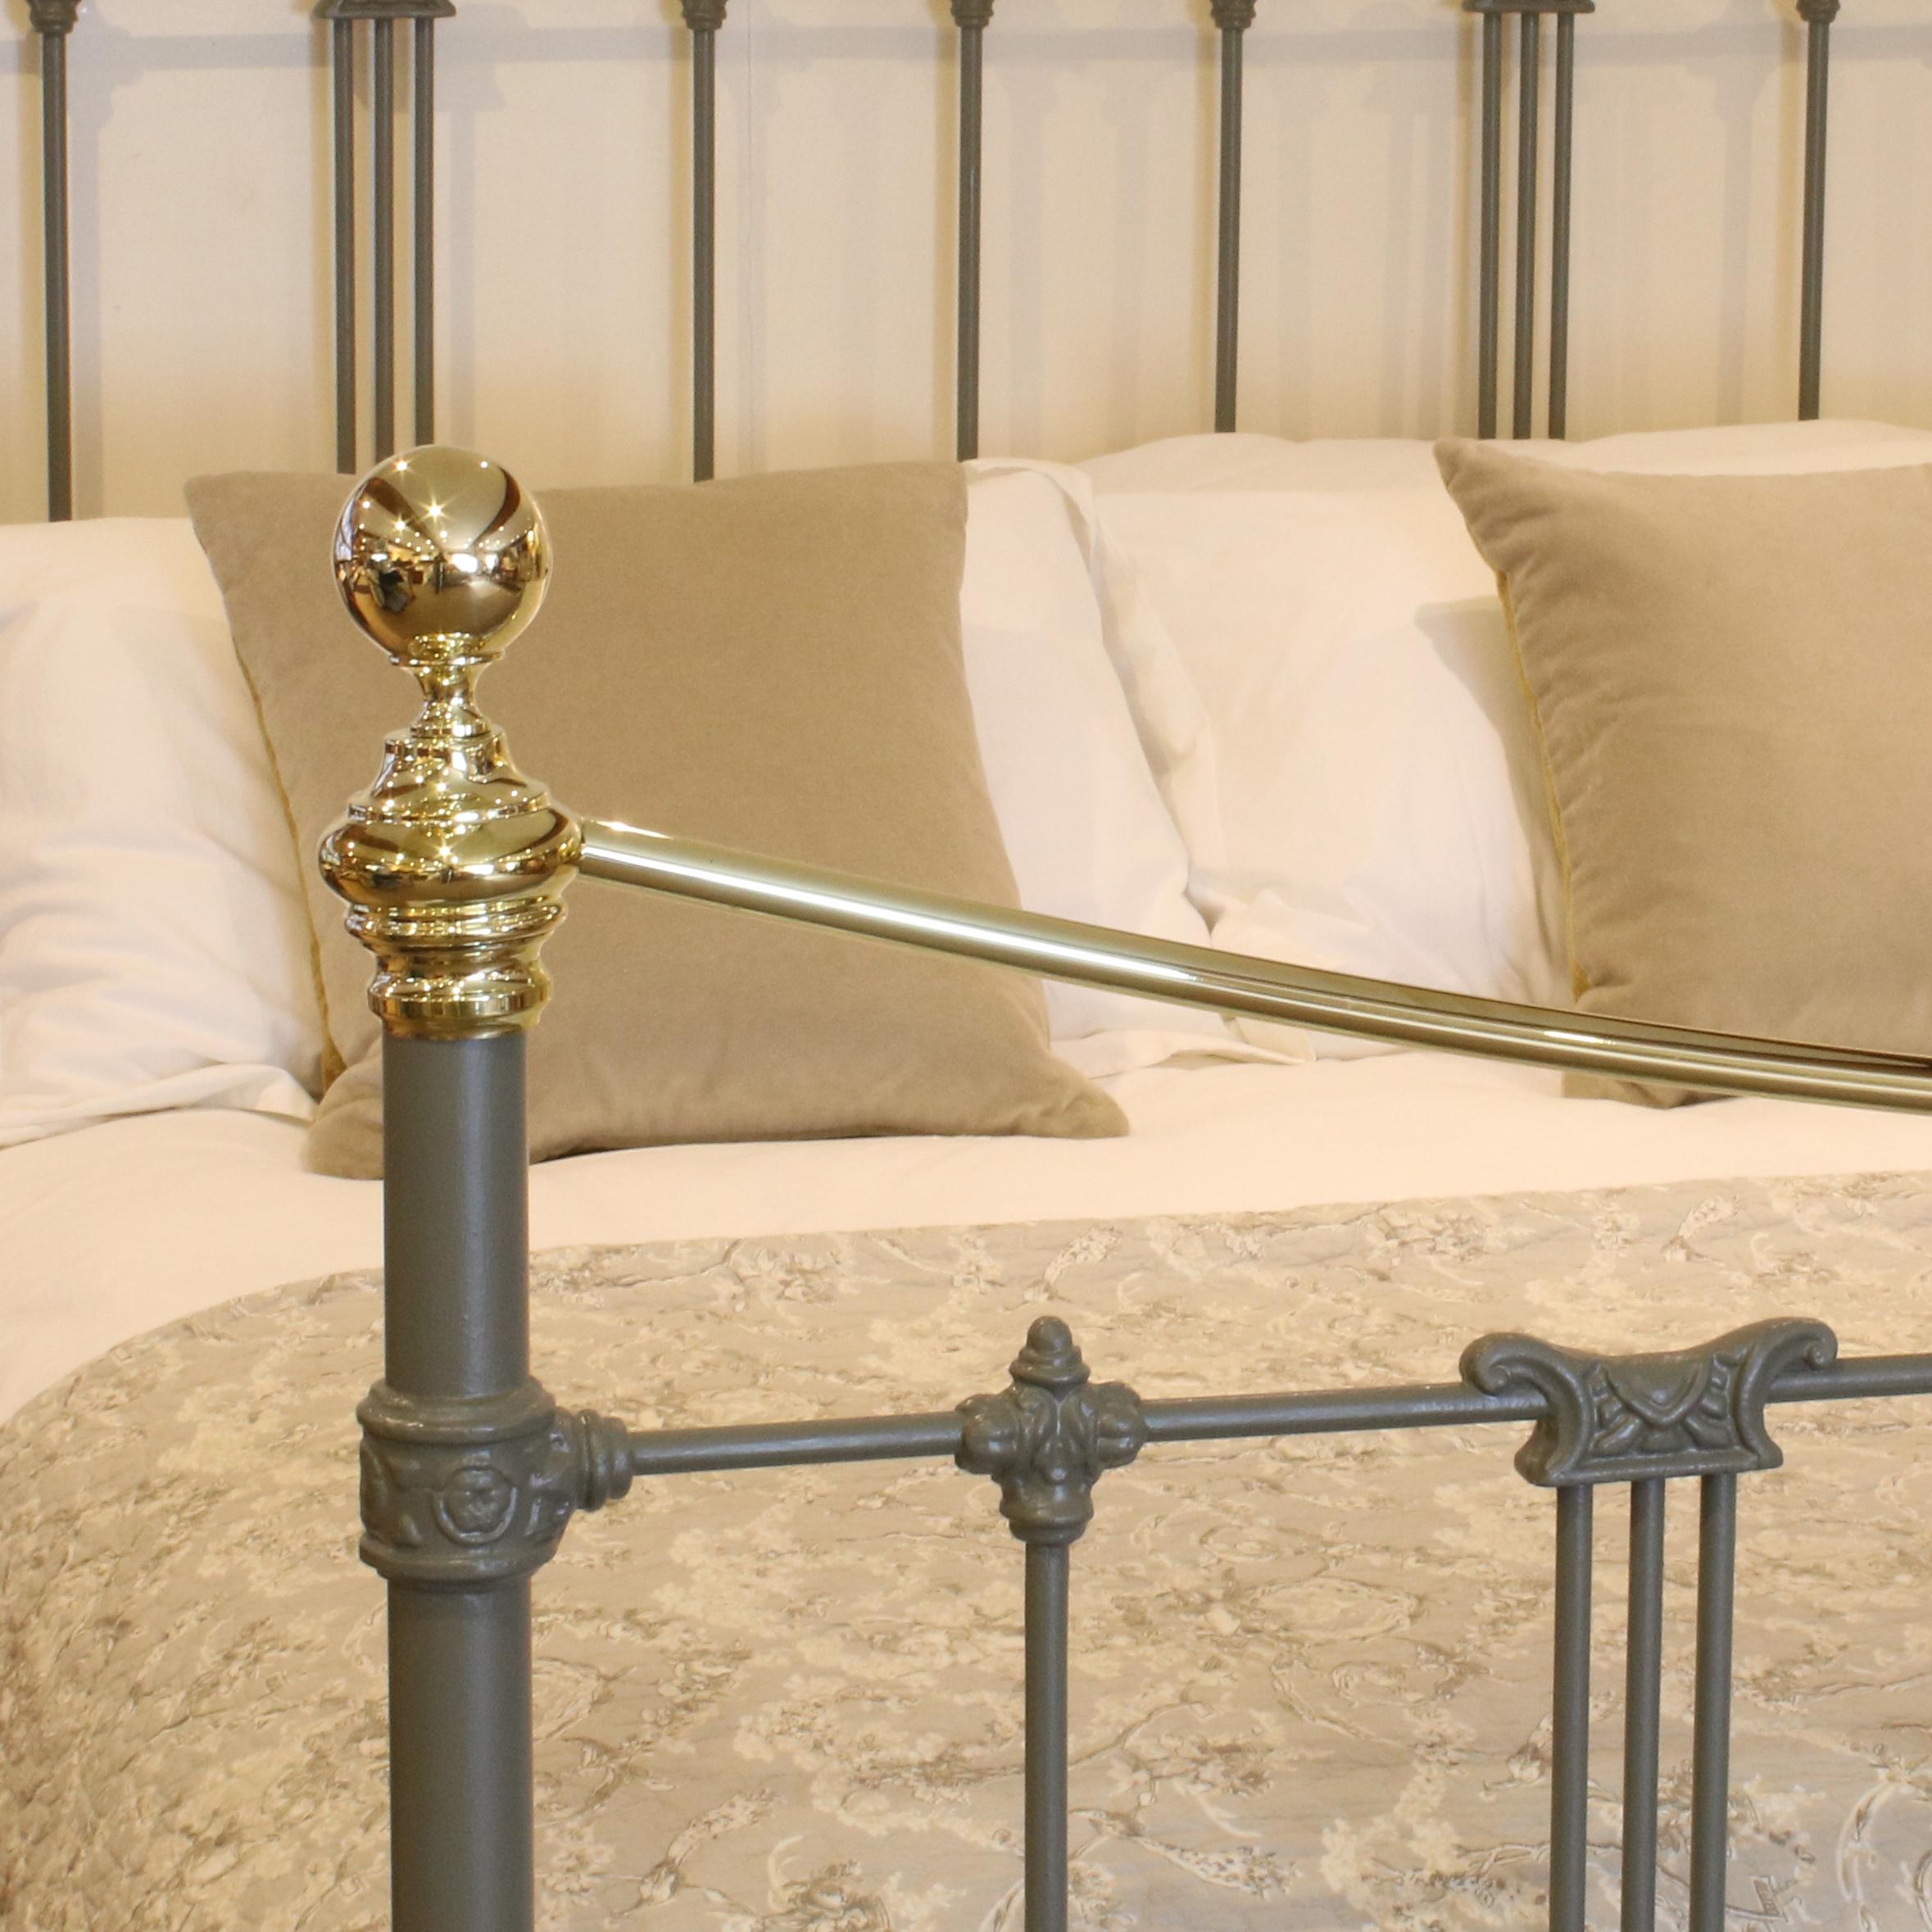 An antique brass and iron bed finished in green smoke with decorative castings and curved brass top rail.

This bed accepts a British King Size or American Queen Size (5ft wide, 60 inches or 150cm) base and mattress set.

The price is for the bed